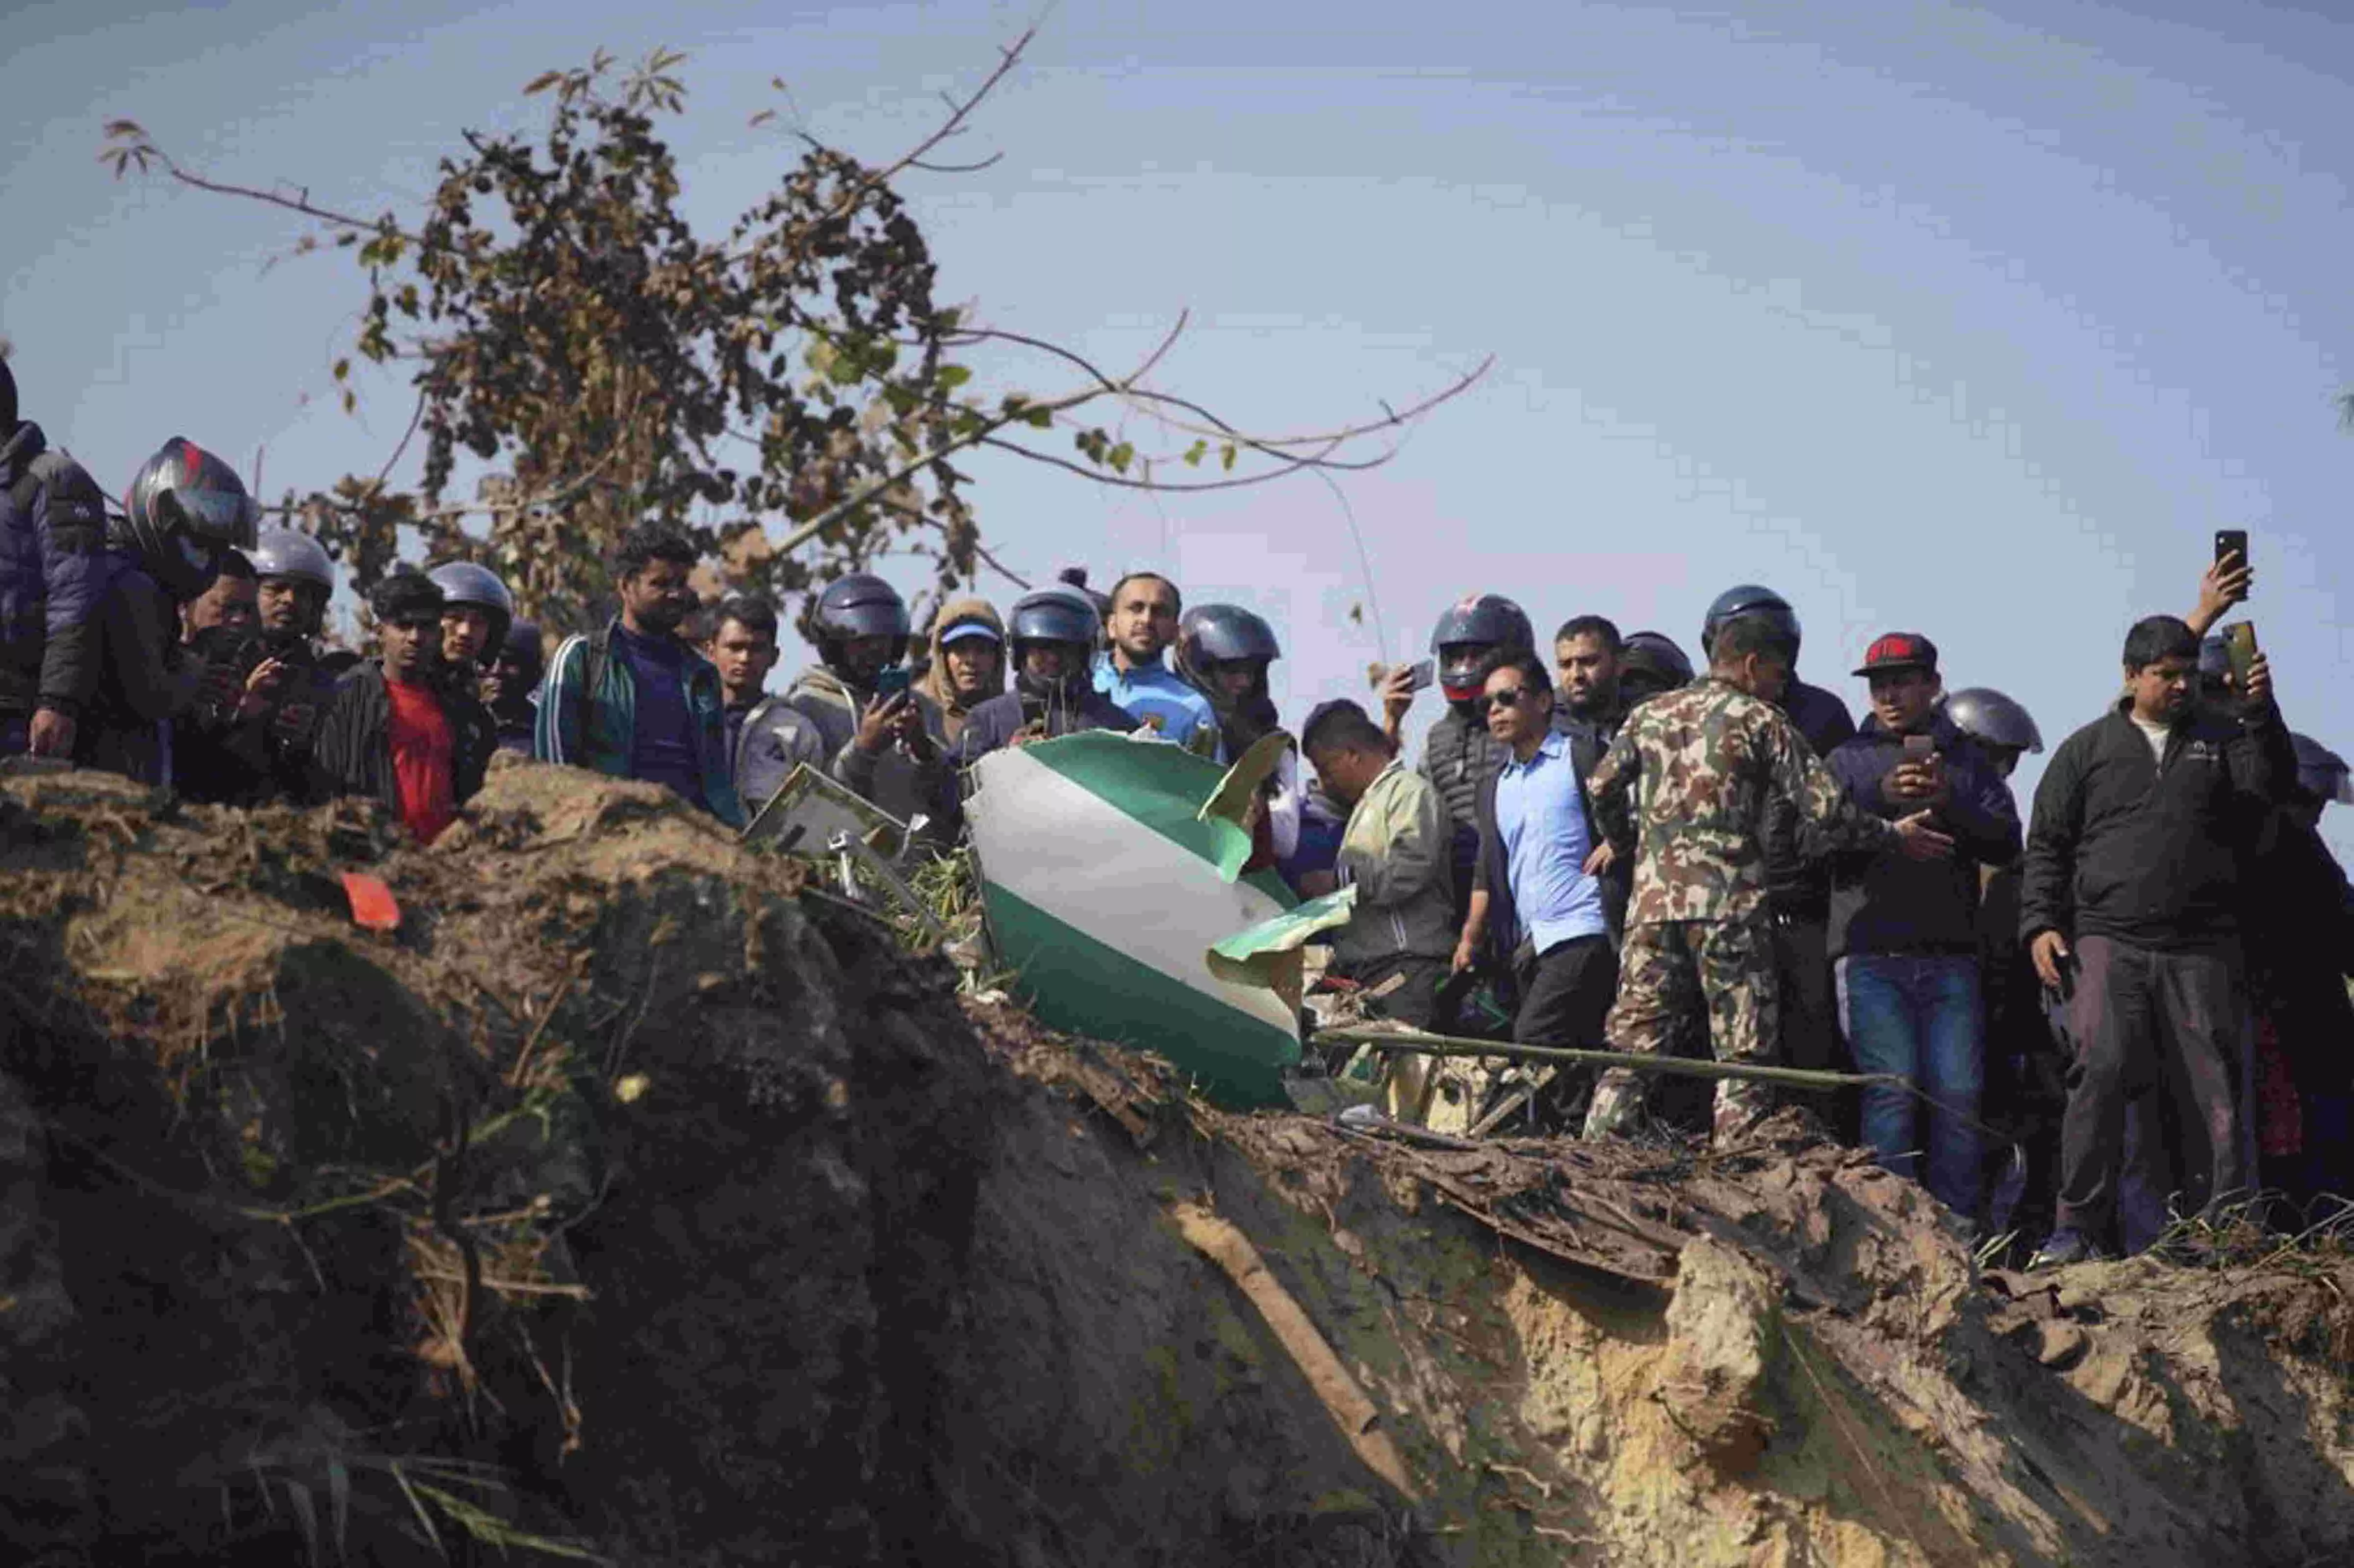 68 Dead As Nepal Plane With 72 On Board Crashes Minutes Before Landing